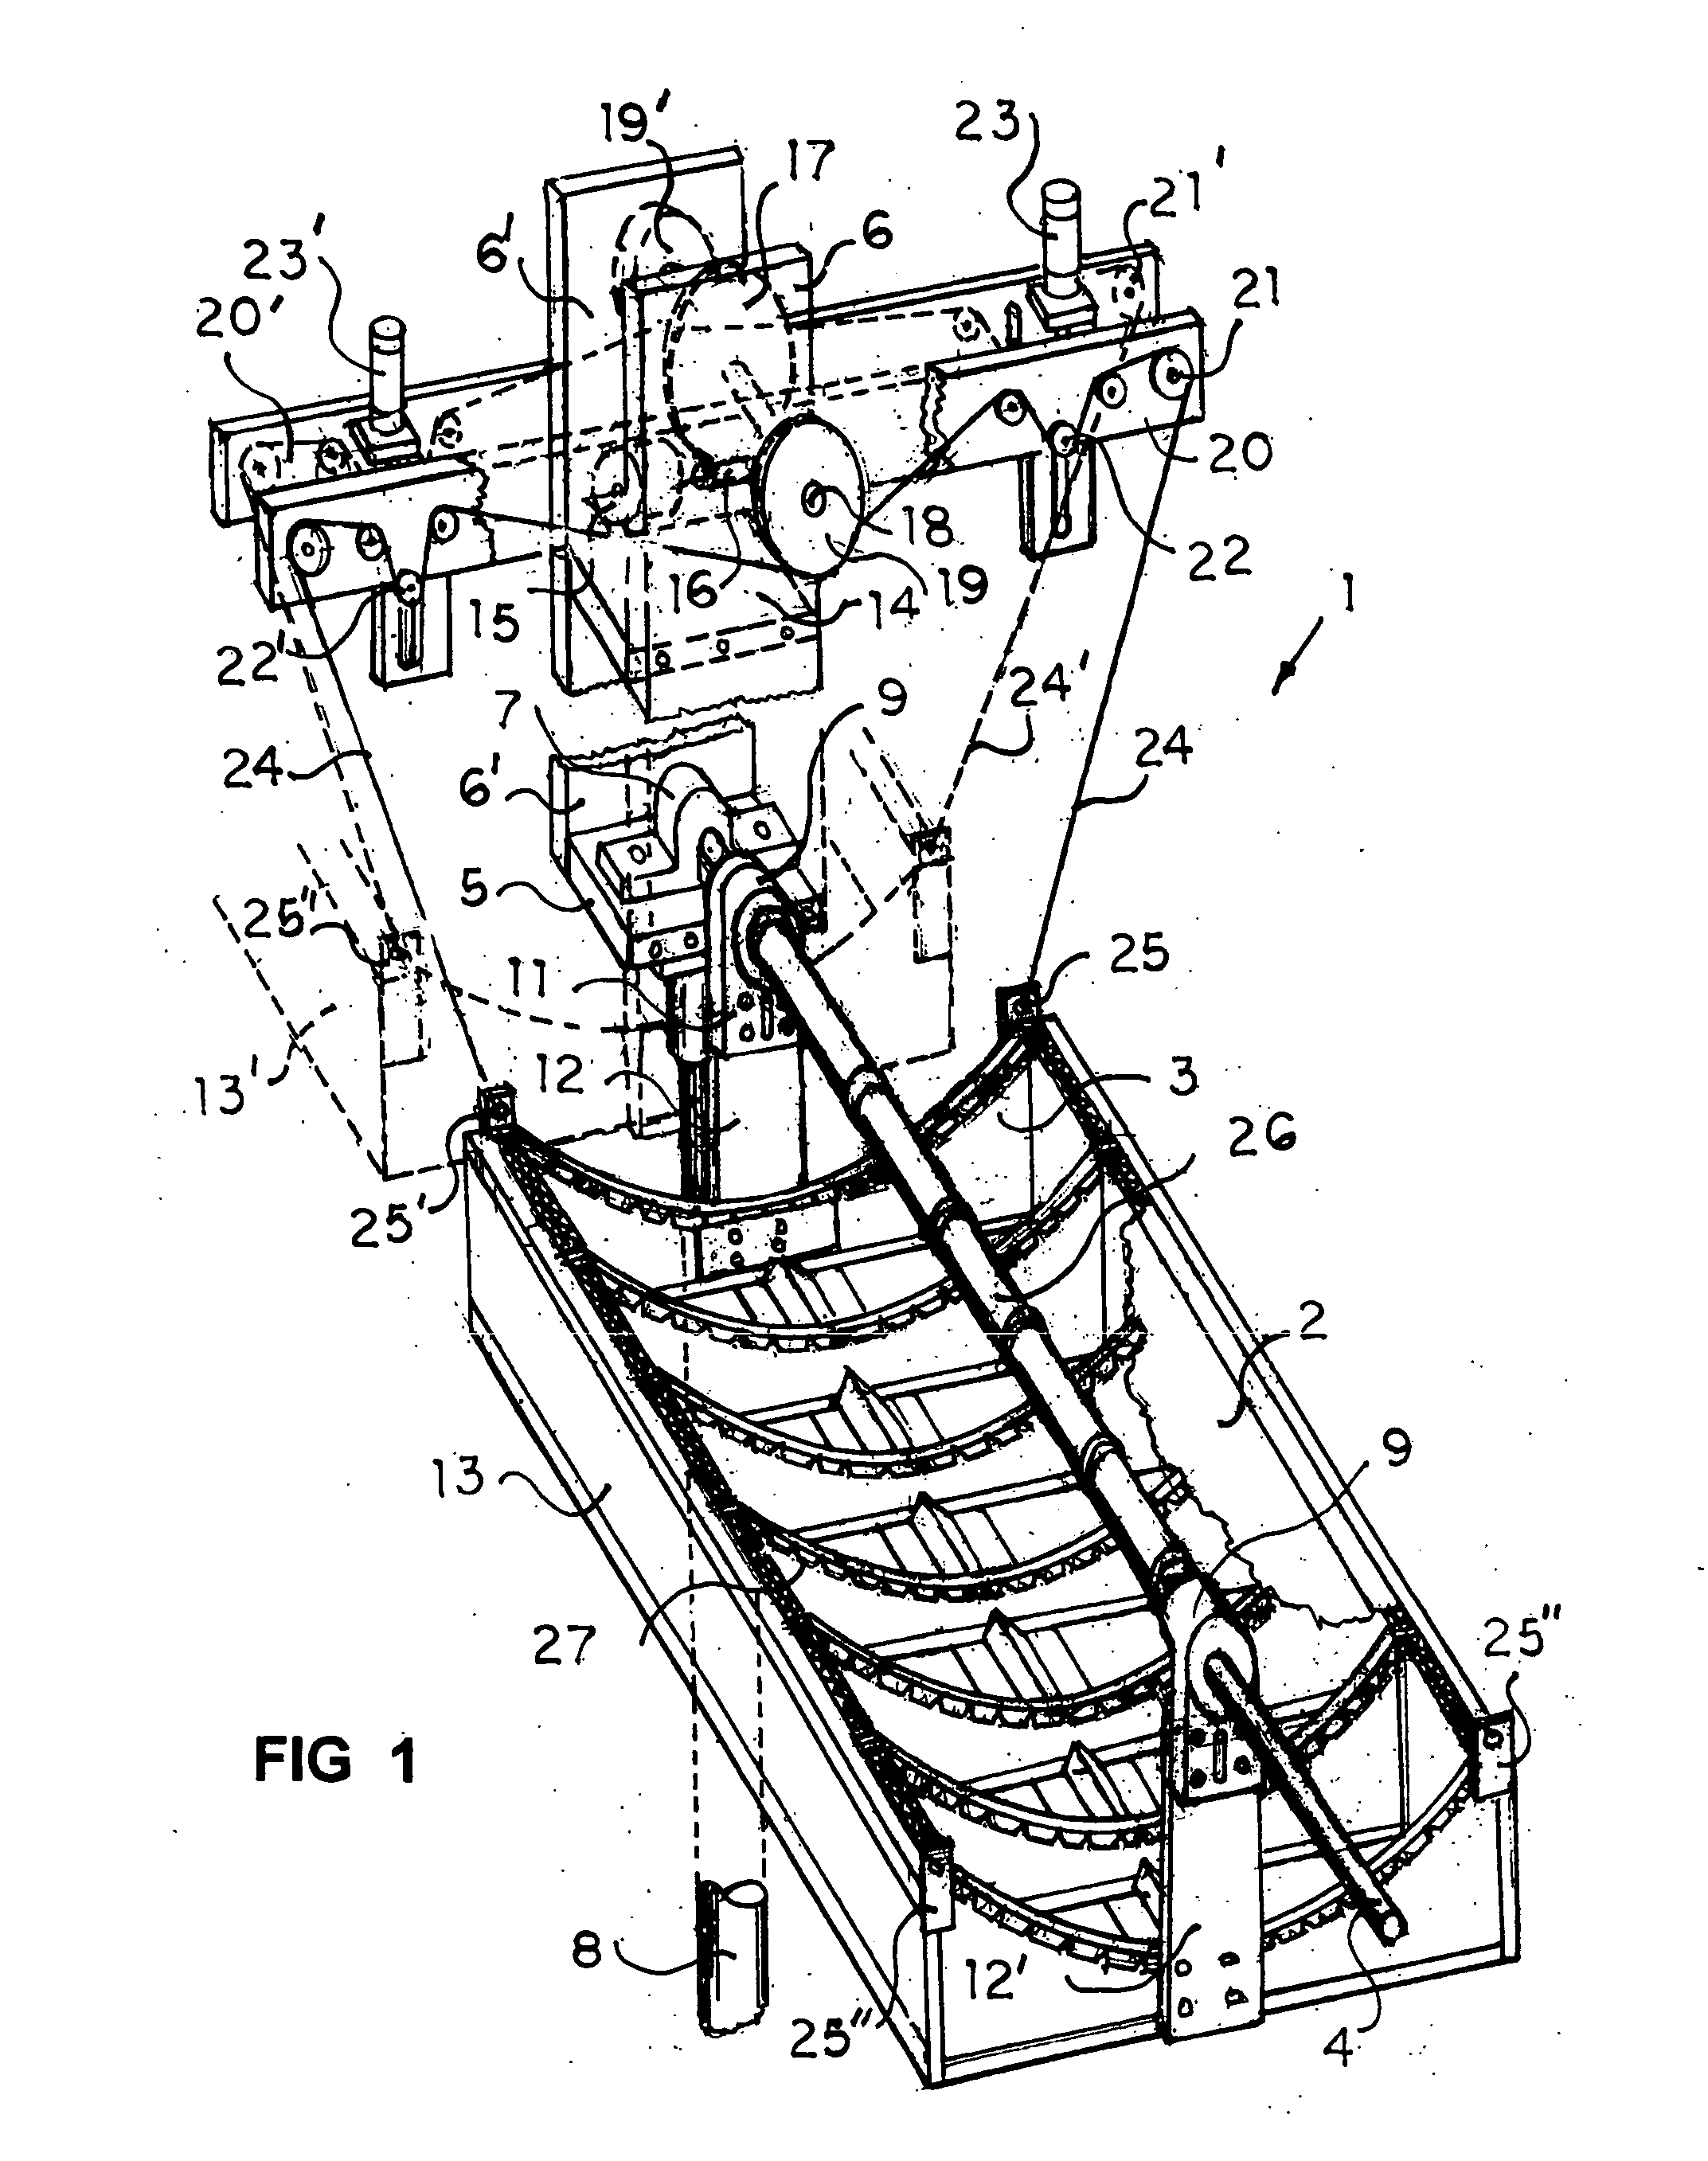 Parabolic trough solar collector for fluid heating and photovoltaic cells